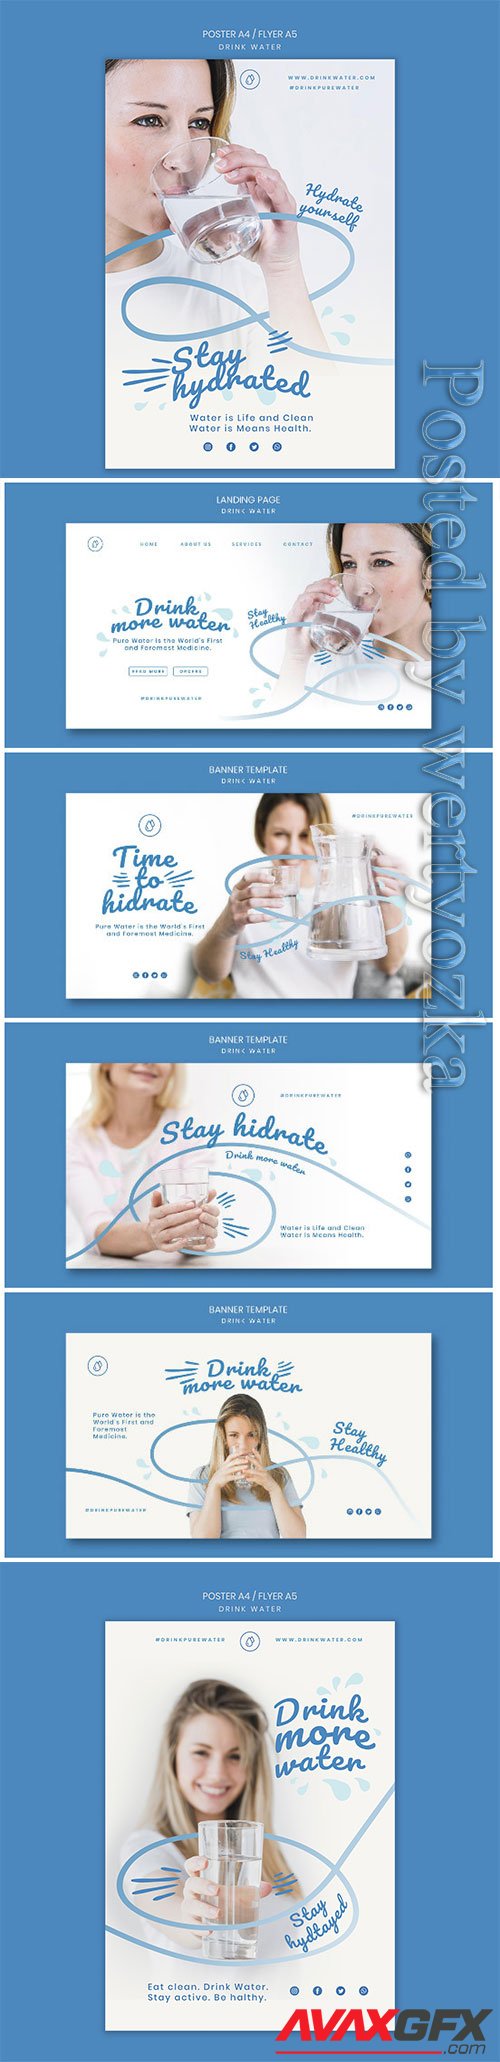 Drink water concept flyer template